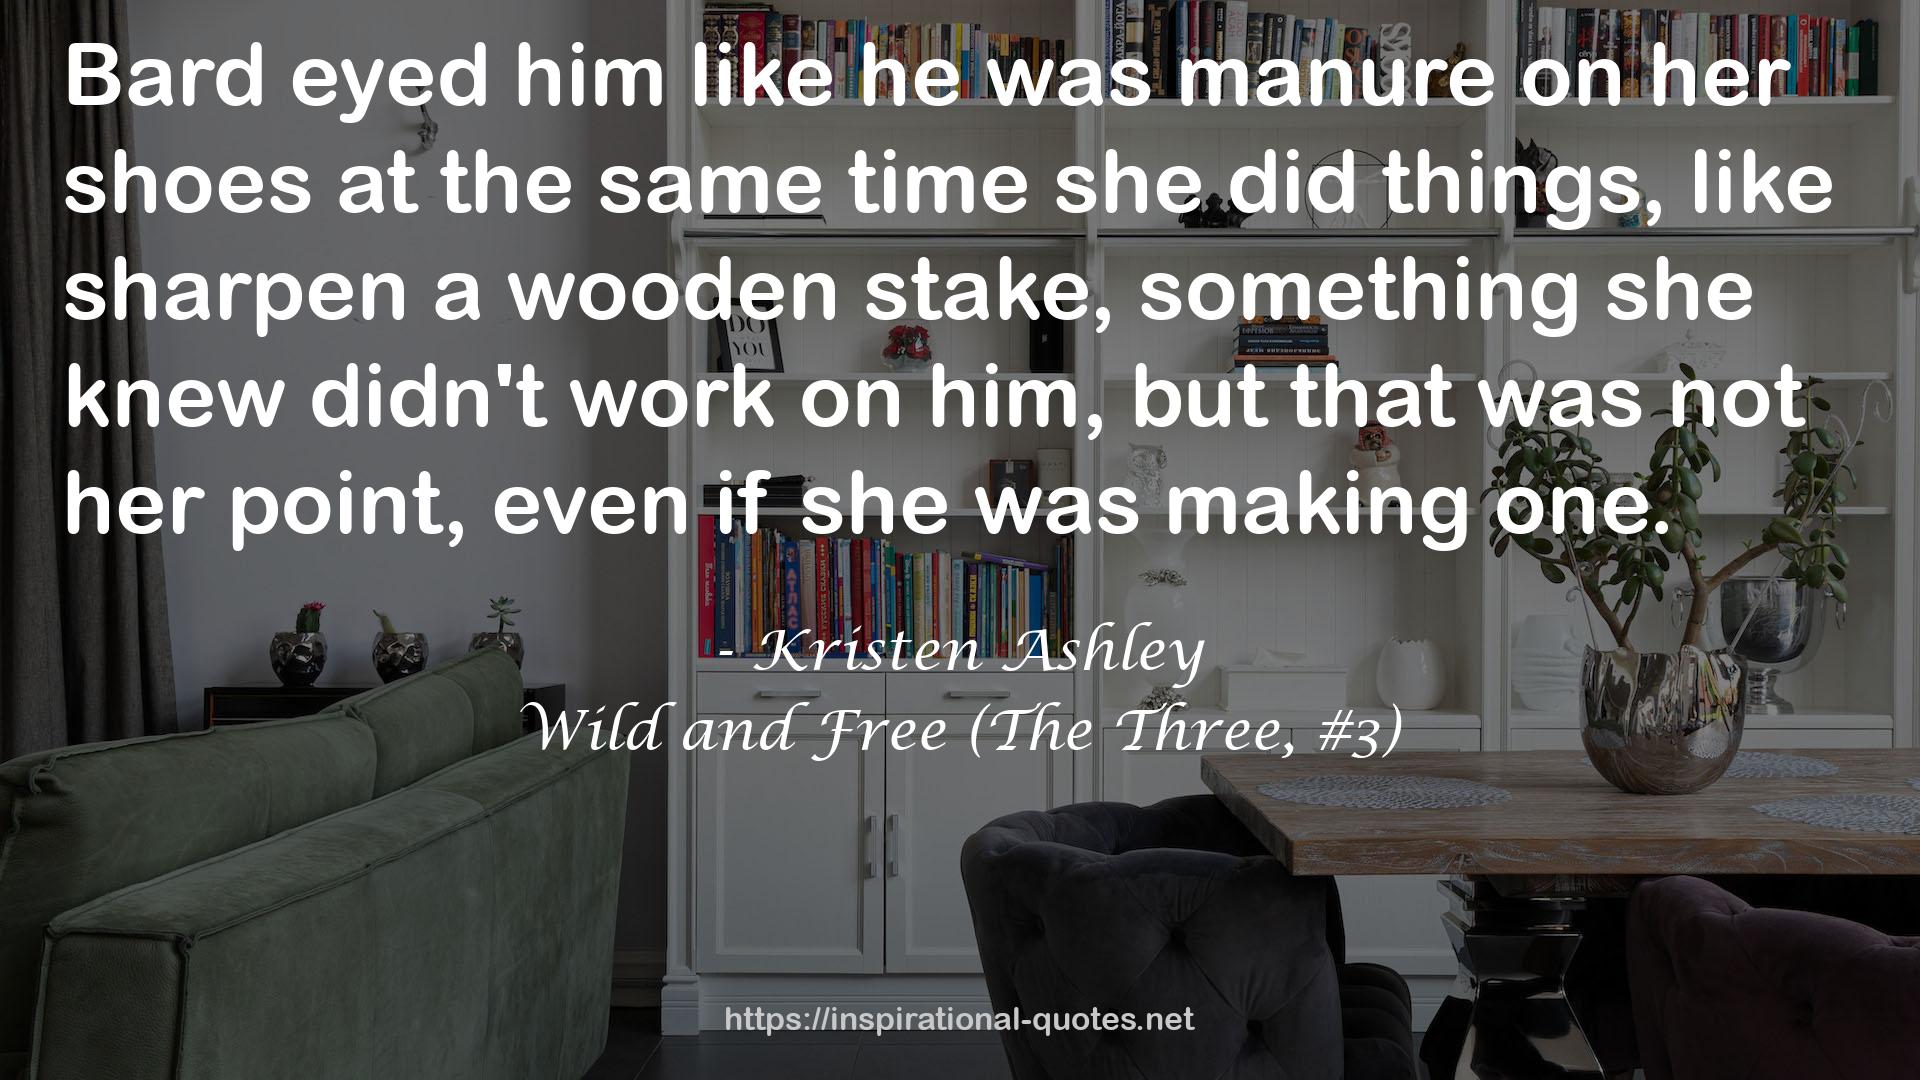 Wild and Free (The Three, #3) QUOTES